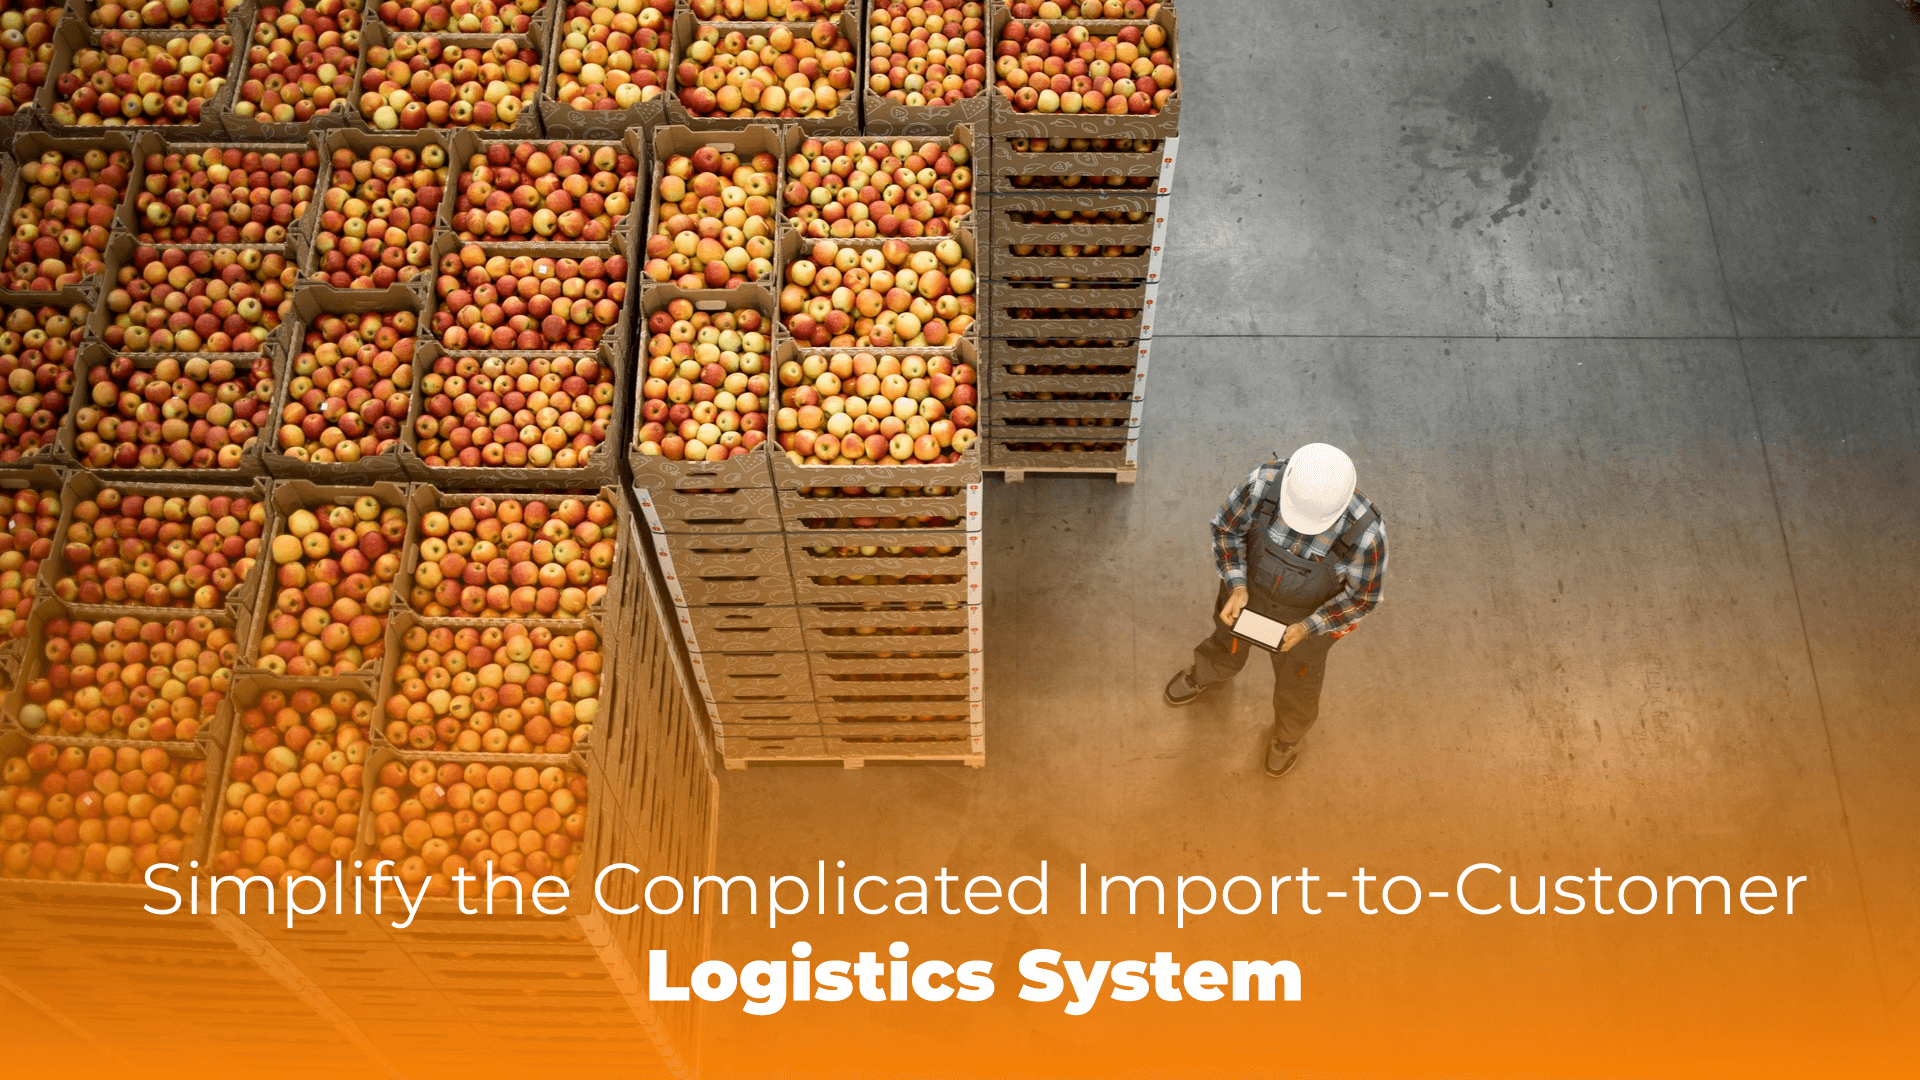 Simplify the Complicated Import-to-Customer Logistics System